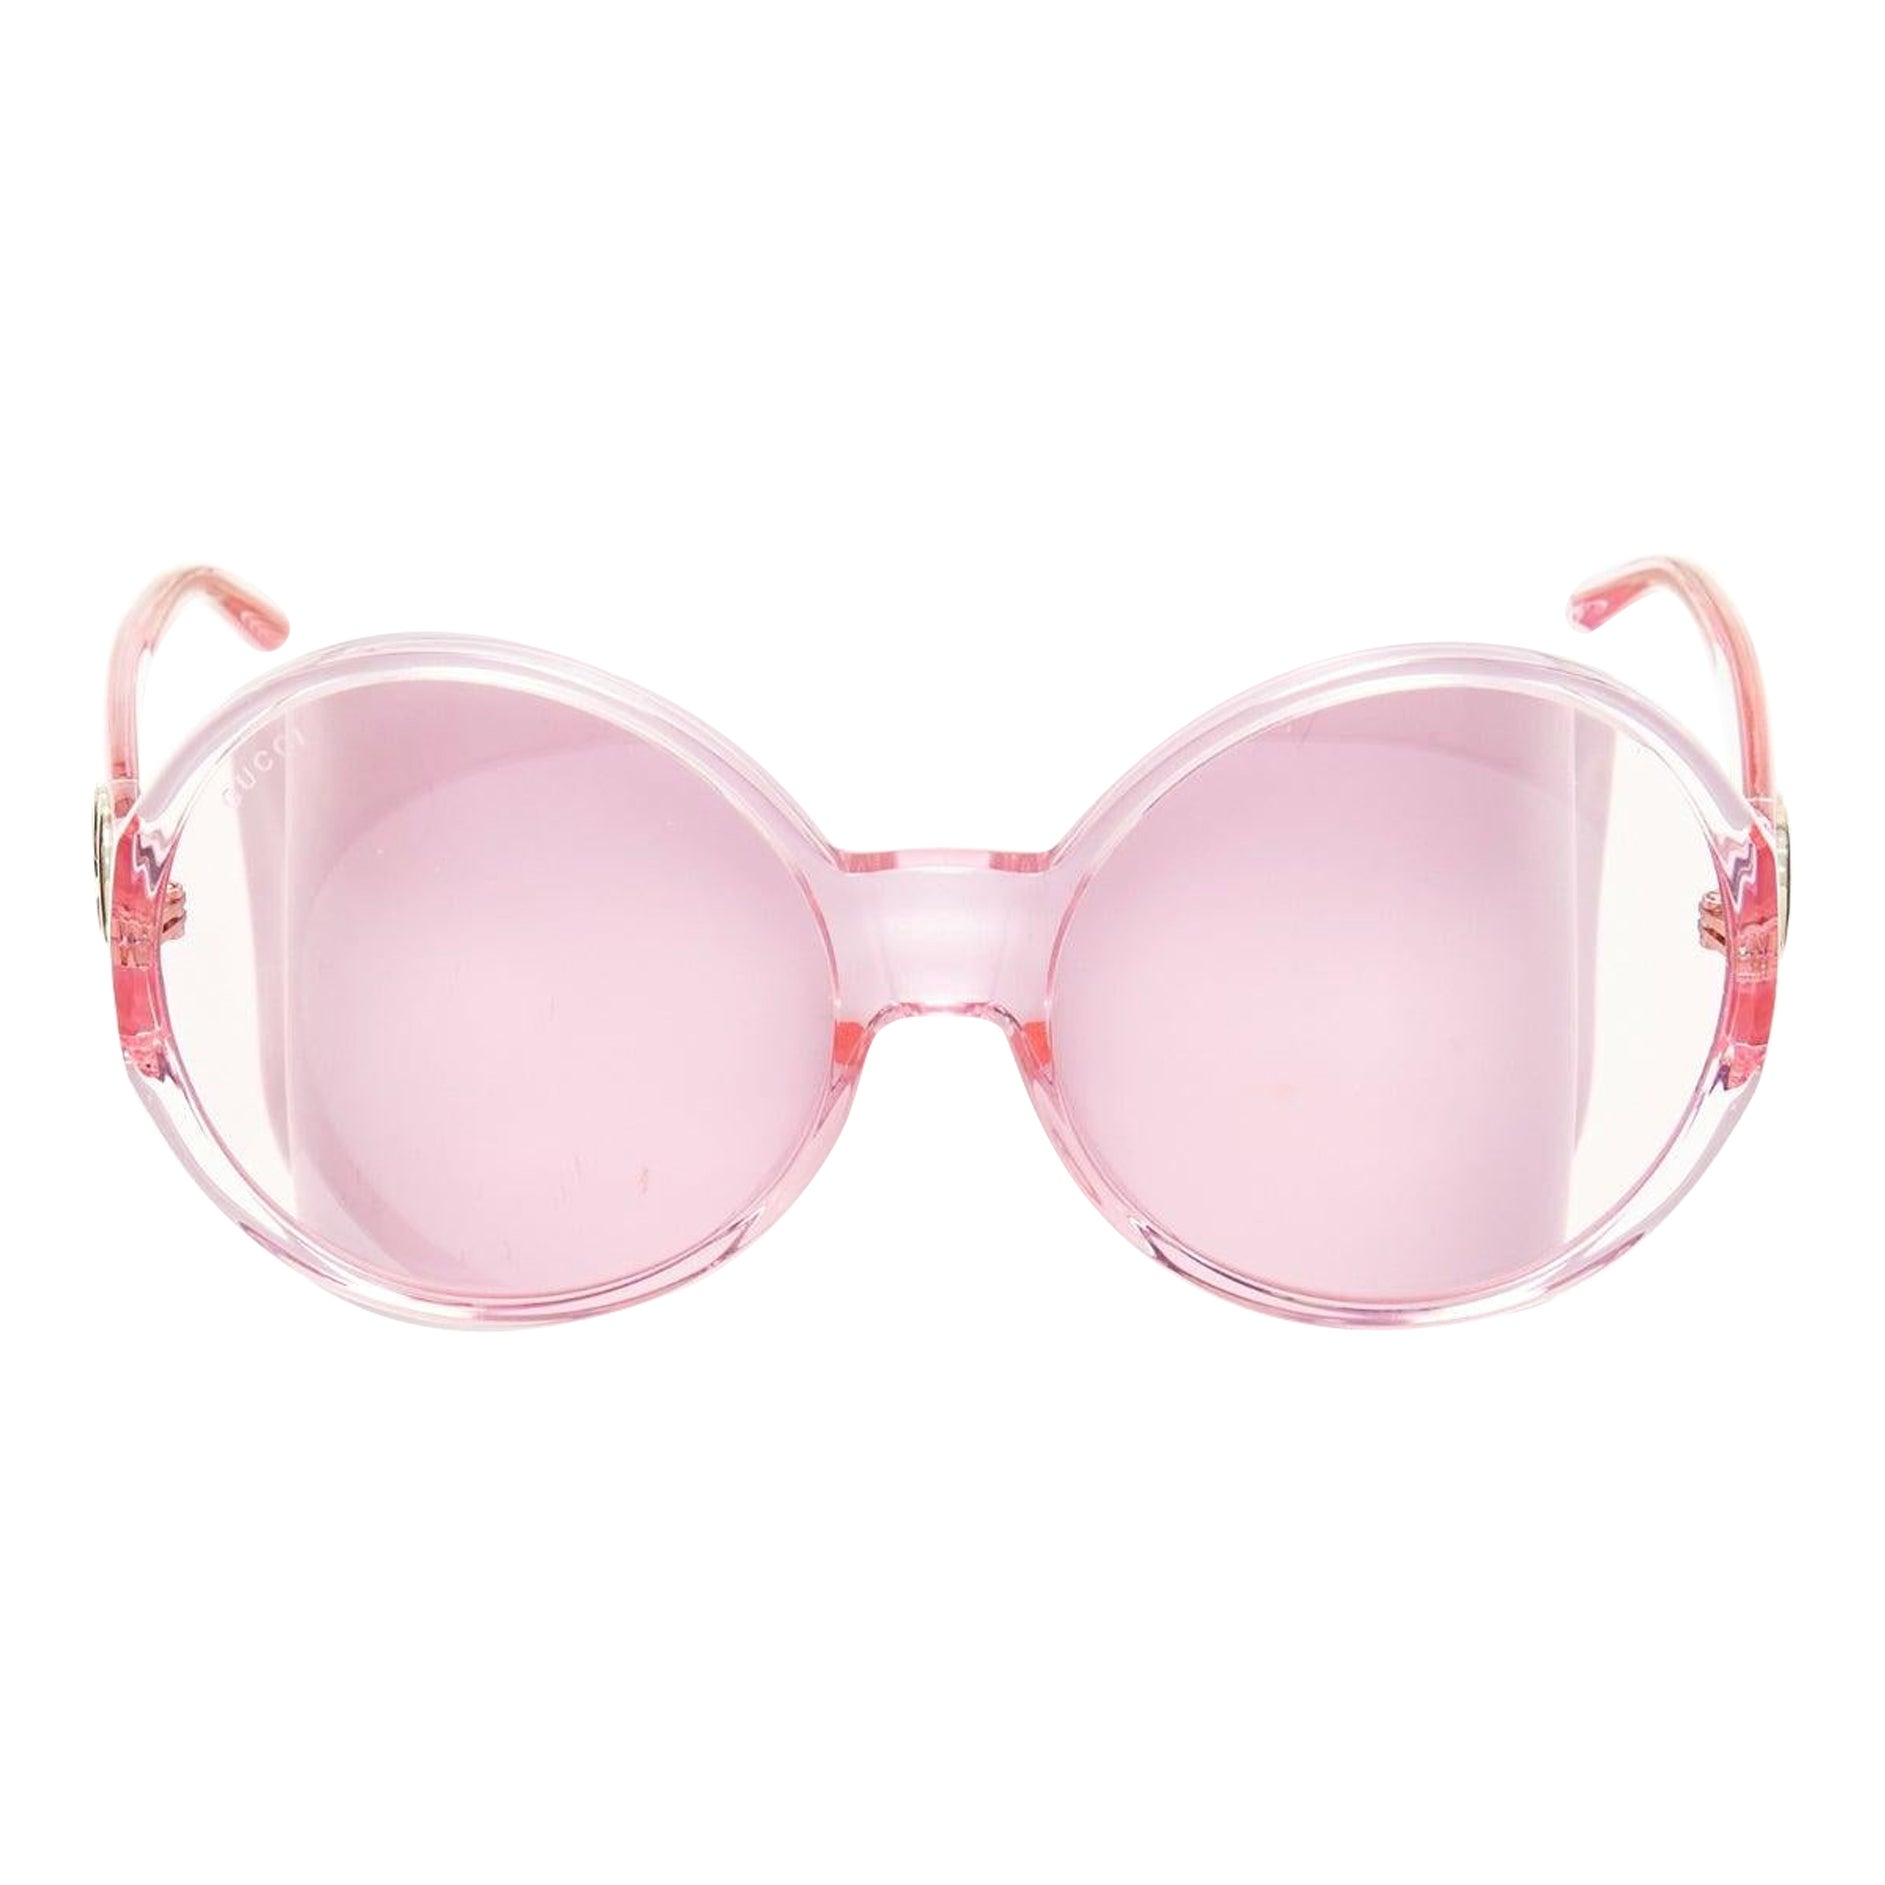 GUCCI Alessandro Michele GG0954S pink hue round frame oversized sunnies For Sale